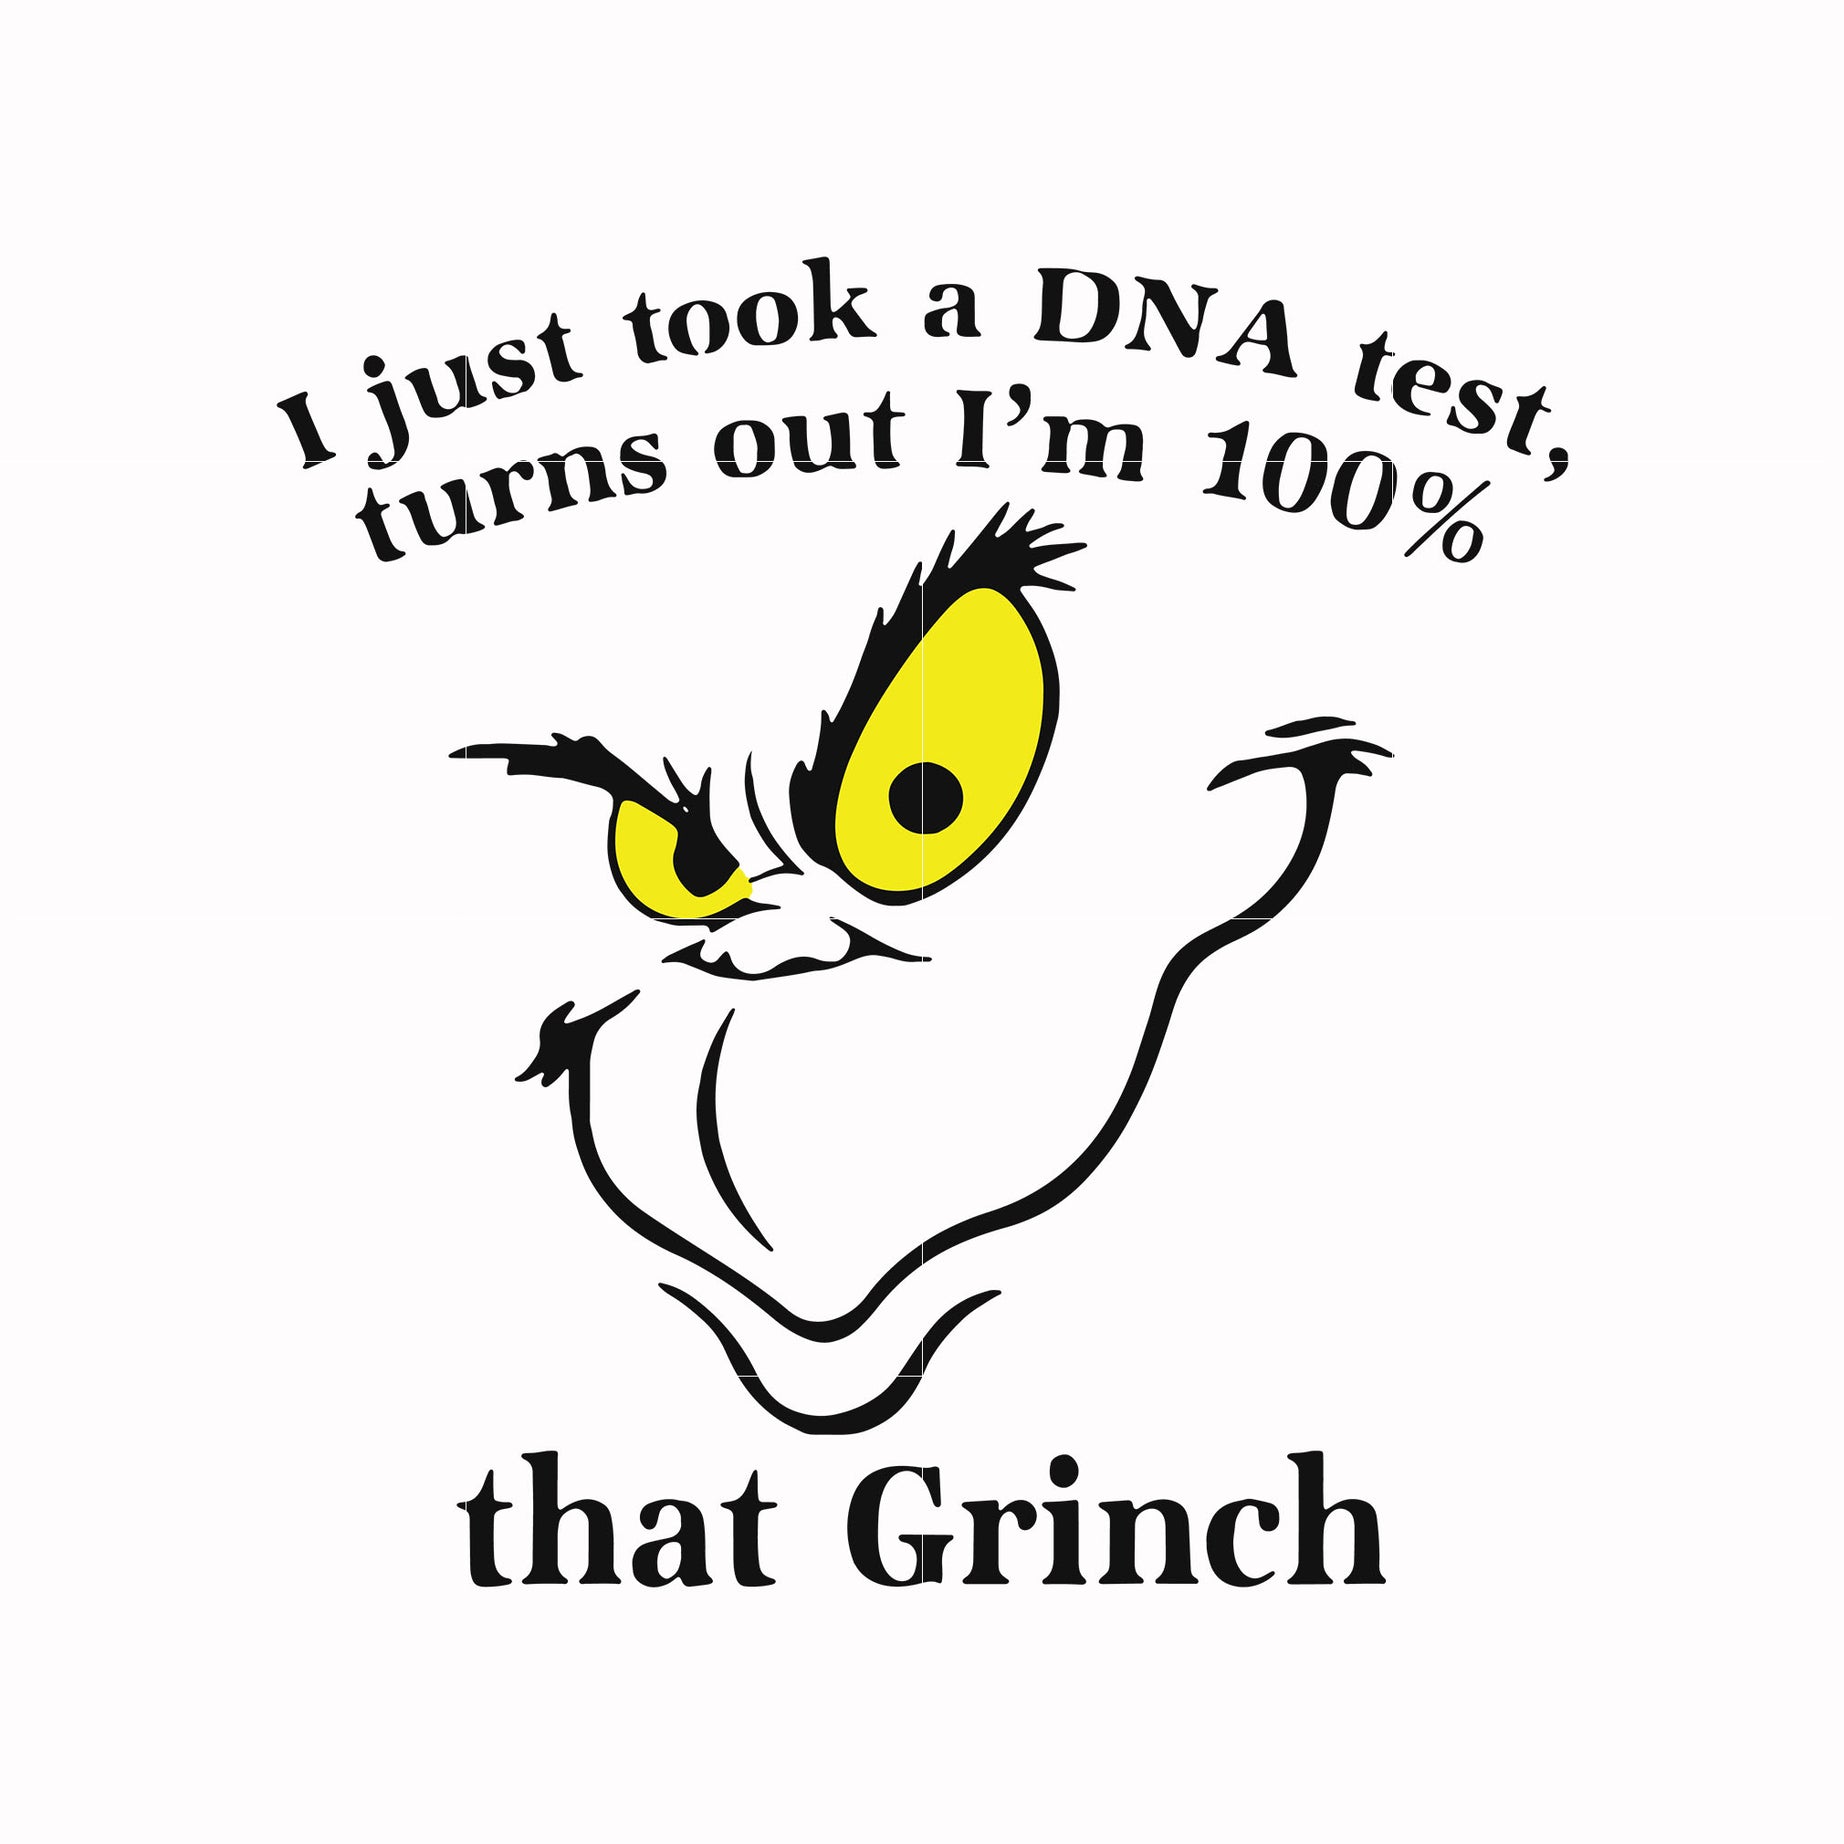 I'm just took a DNA test turn out I'm 100% that Grinch svg, png, dxf, eps digital file NCRM0037